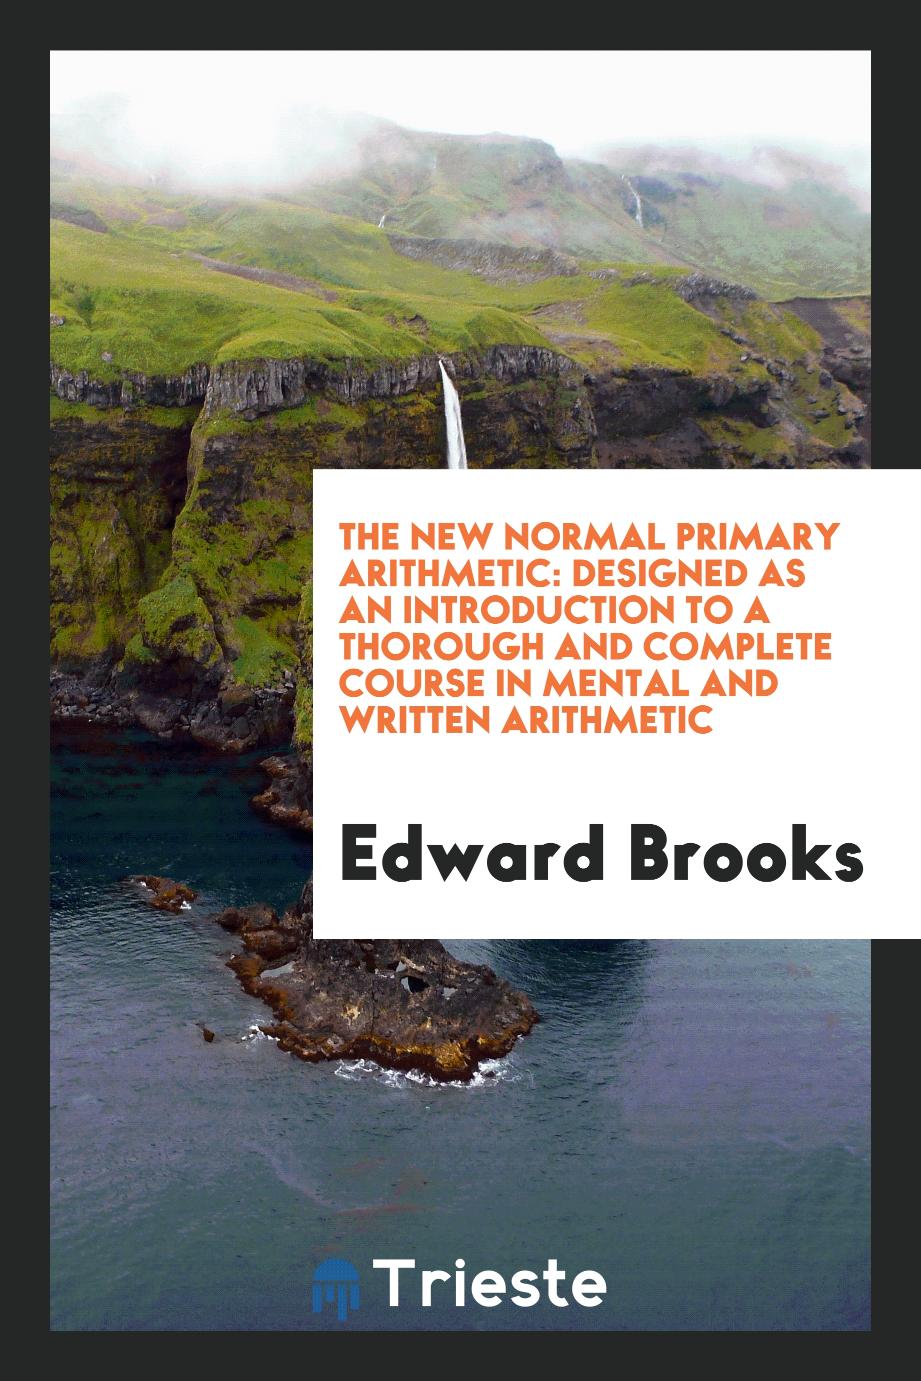 The New Normal Primary Arithmetic: Designed as an Introduction to a Thorough and Complete Course in Mental and Written Arithmetic